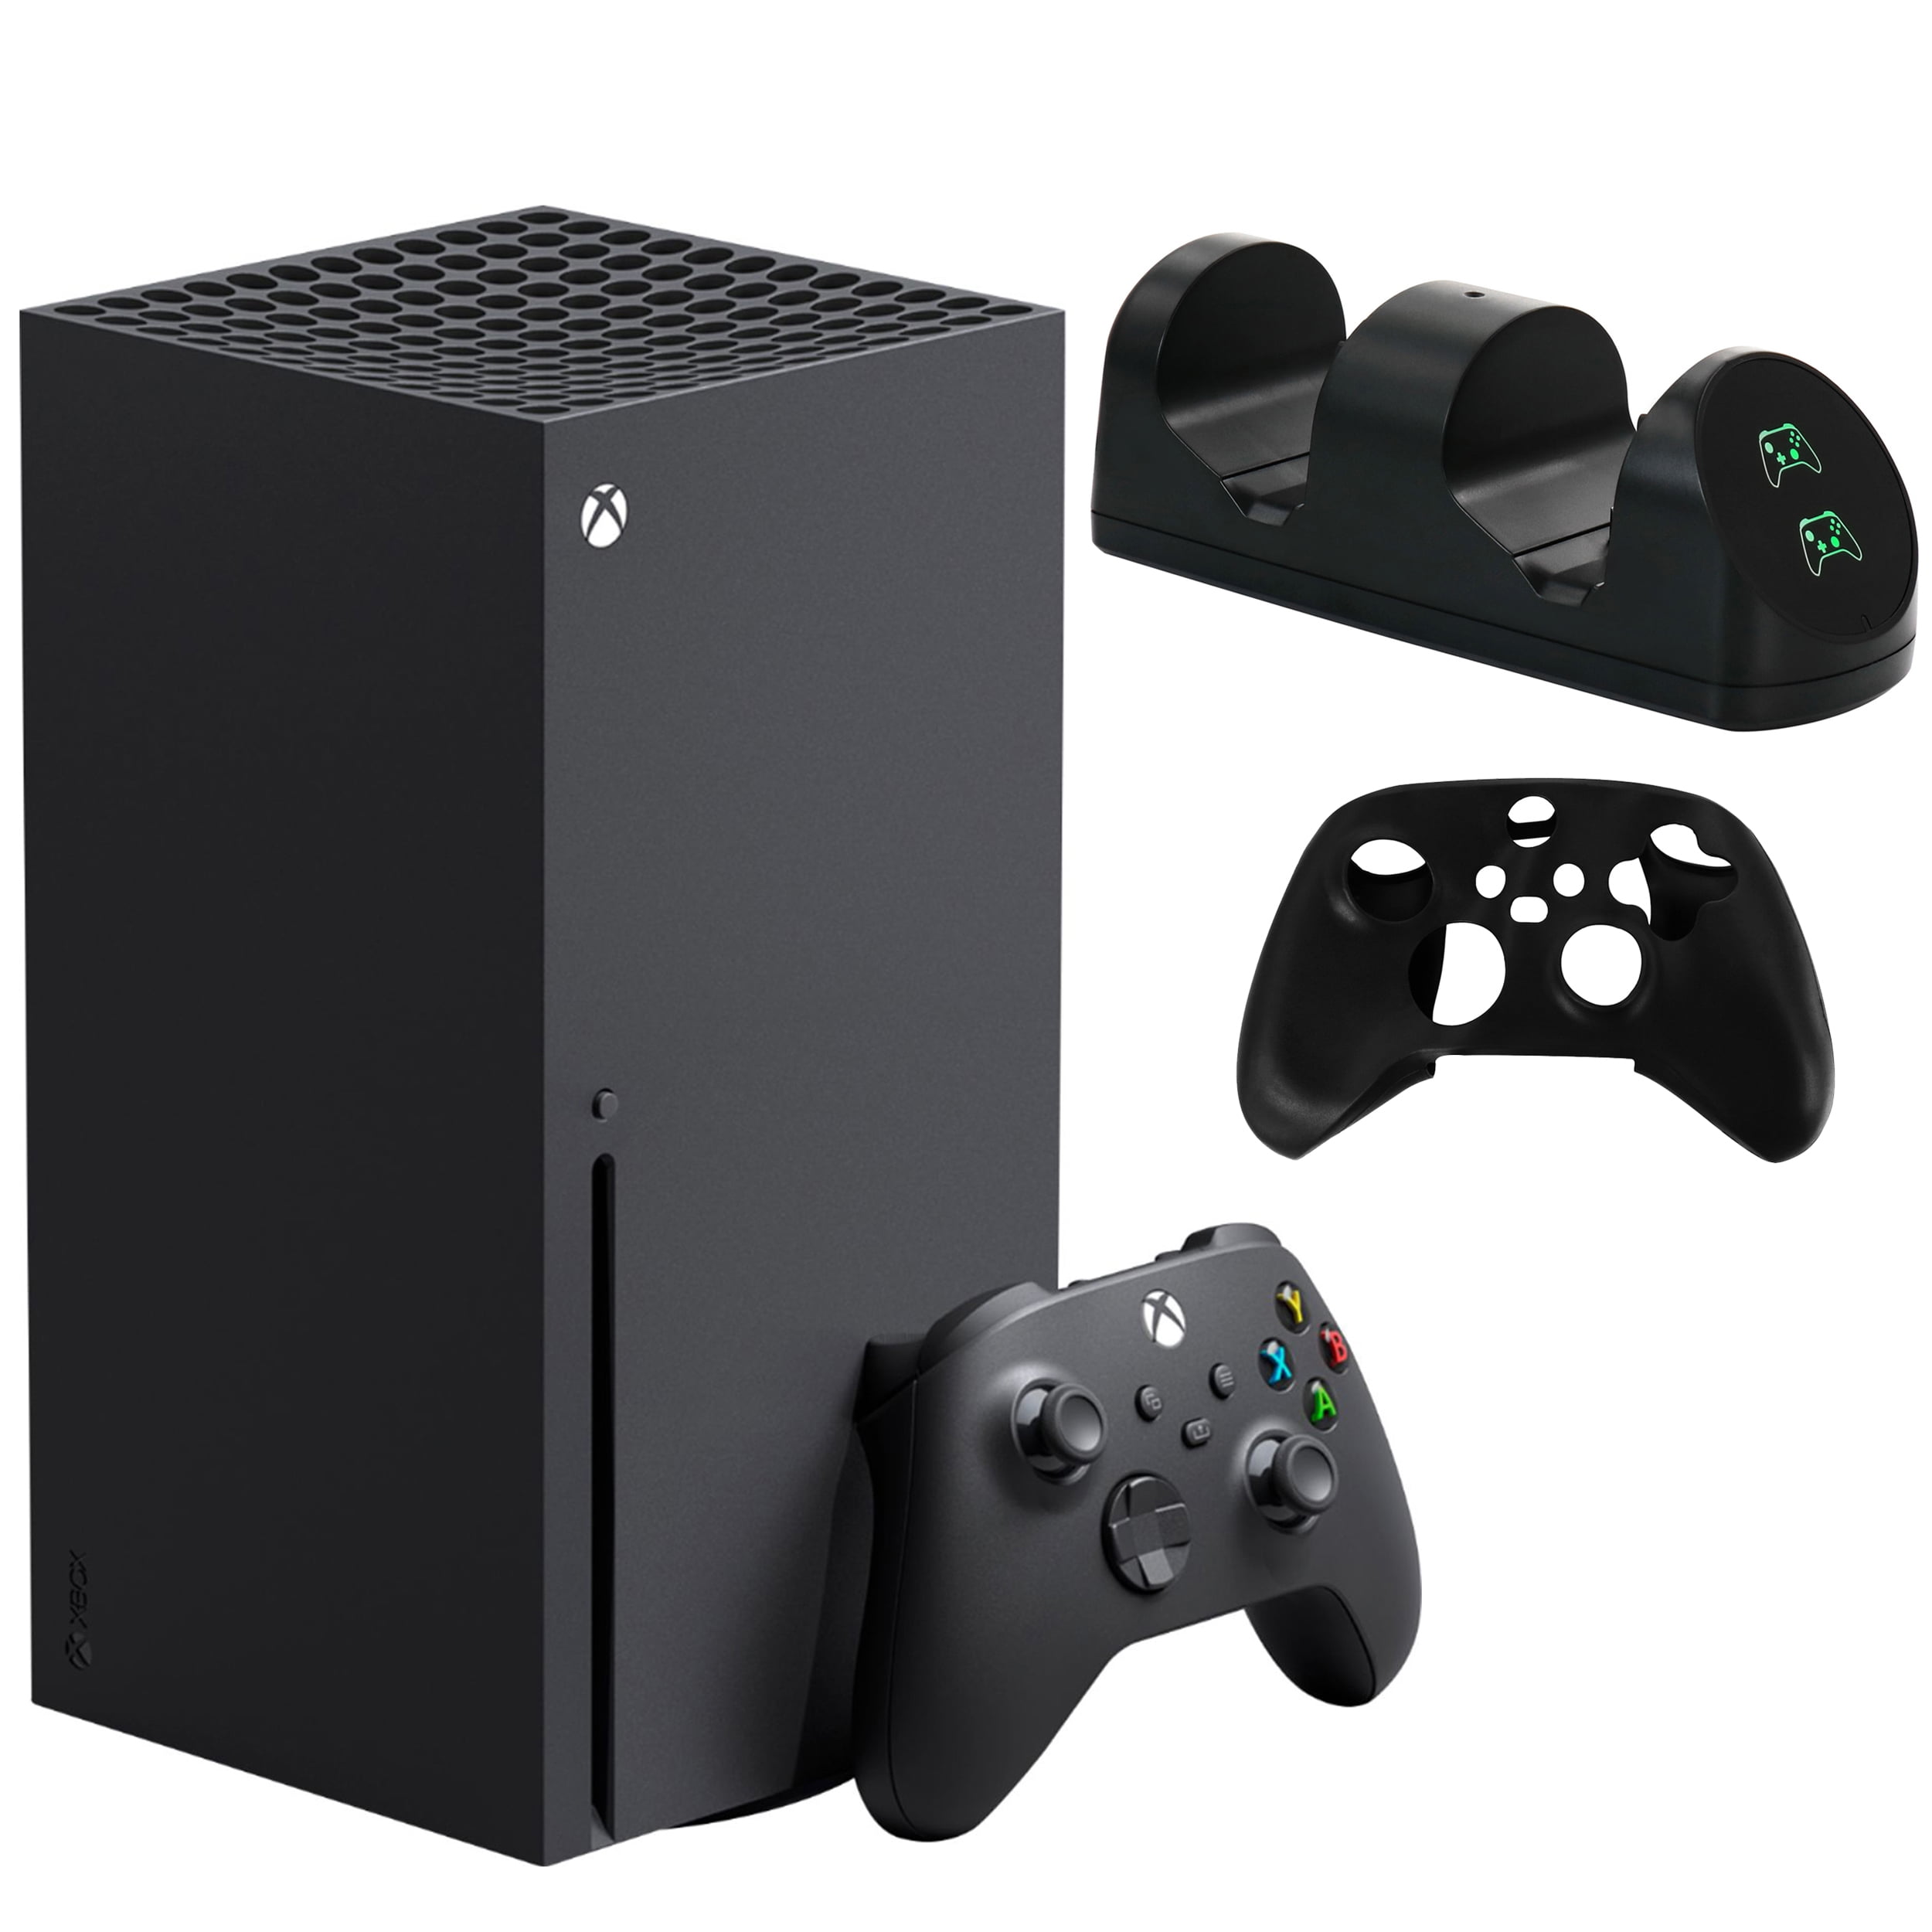 Vertrouwelijk schot Vervagen Xbox Series X Console with Dual Charger and Silicone Sleeve - Walmart.com